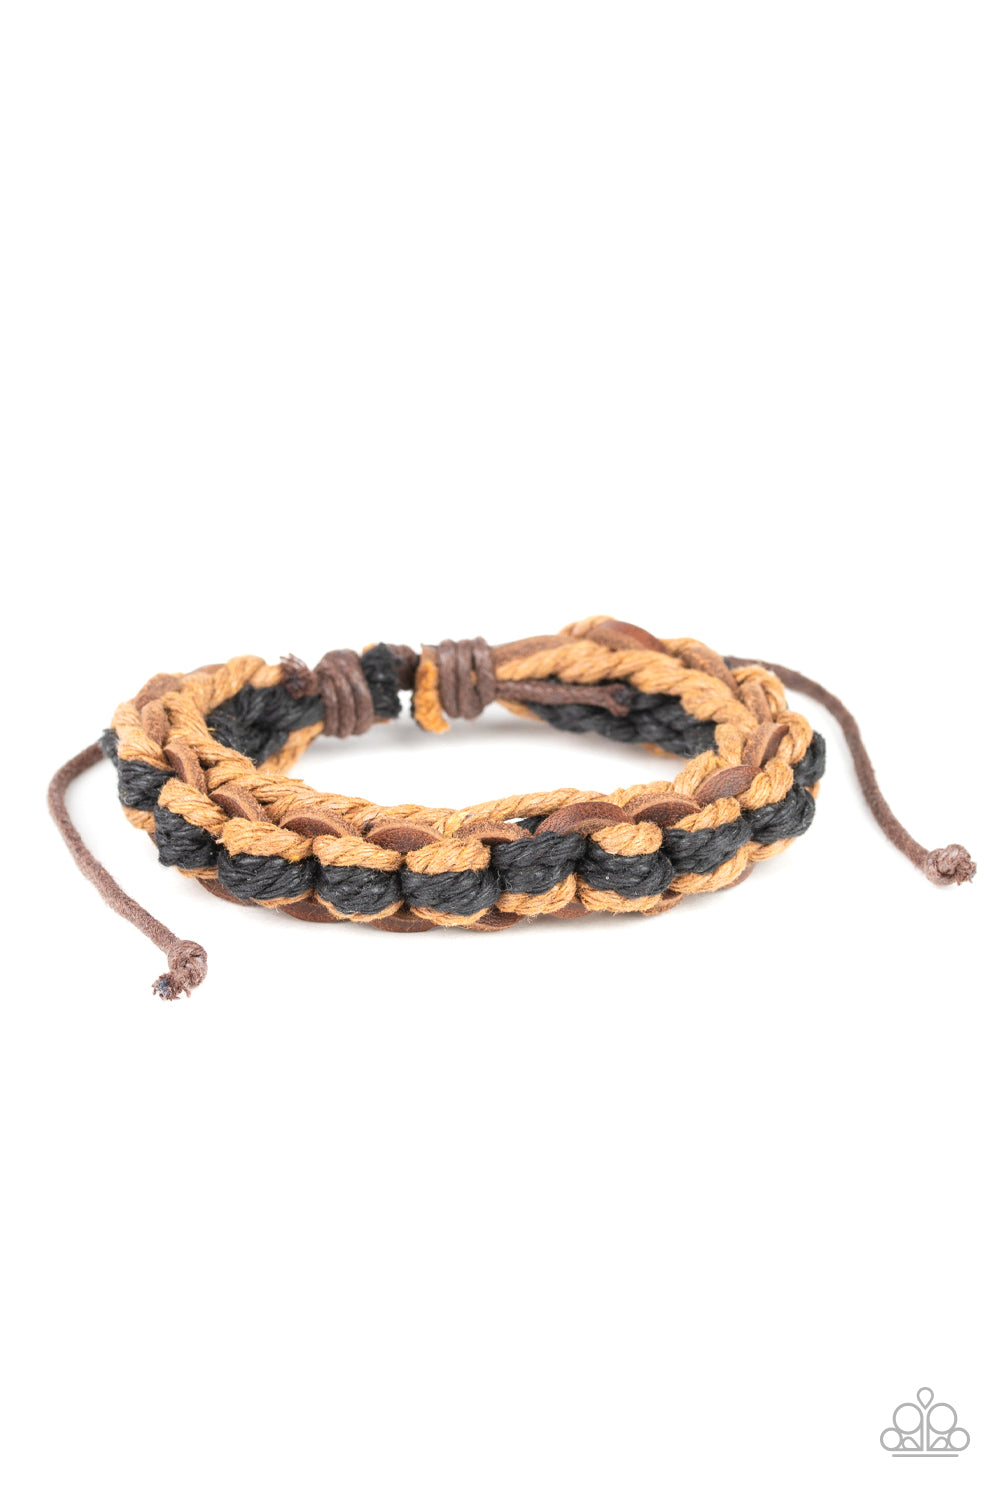 Paparazzi WEAVE It To Me - Brown - and Black Weave - Leather Bracelet - $5 Jewelry with Ashley Swint